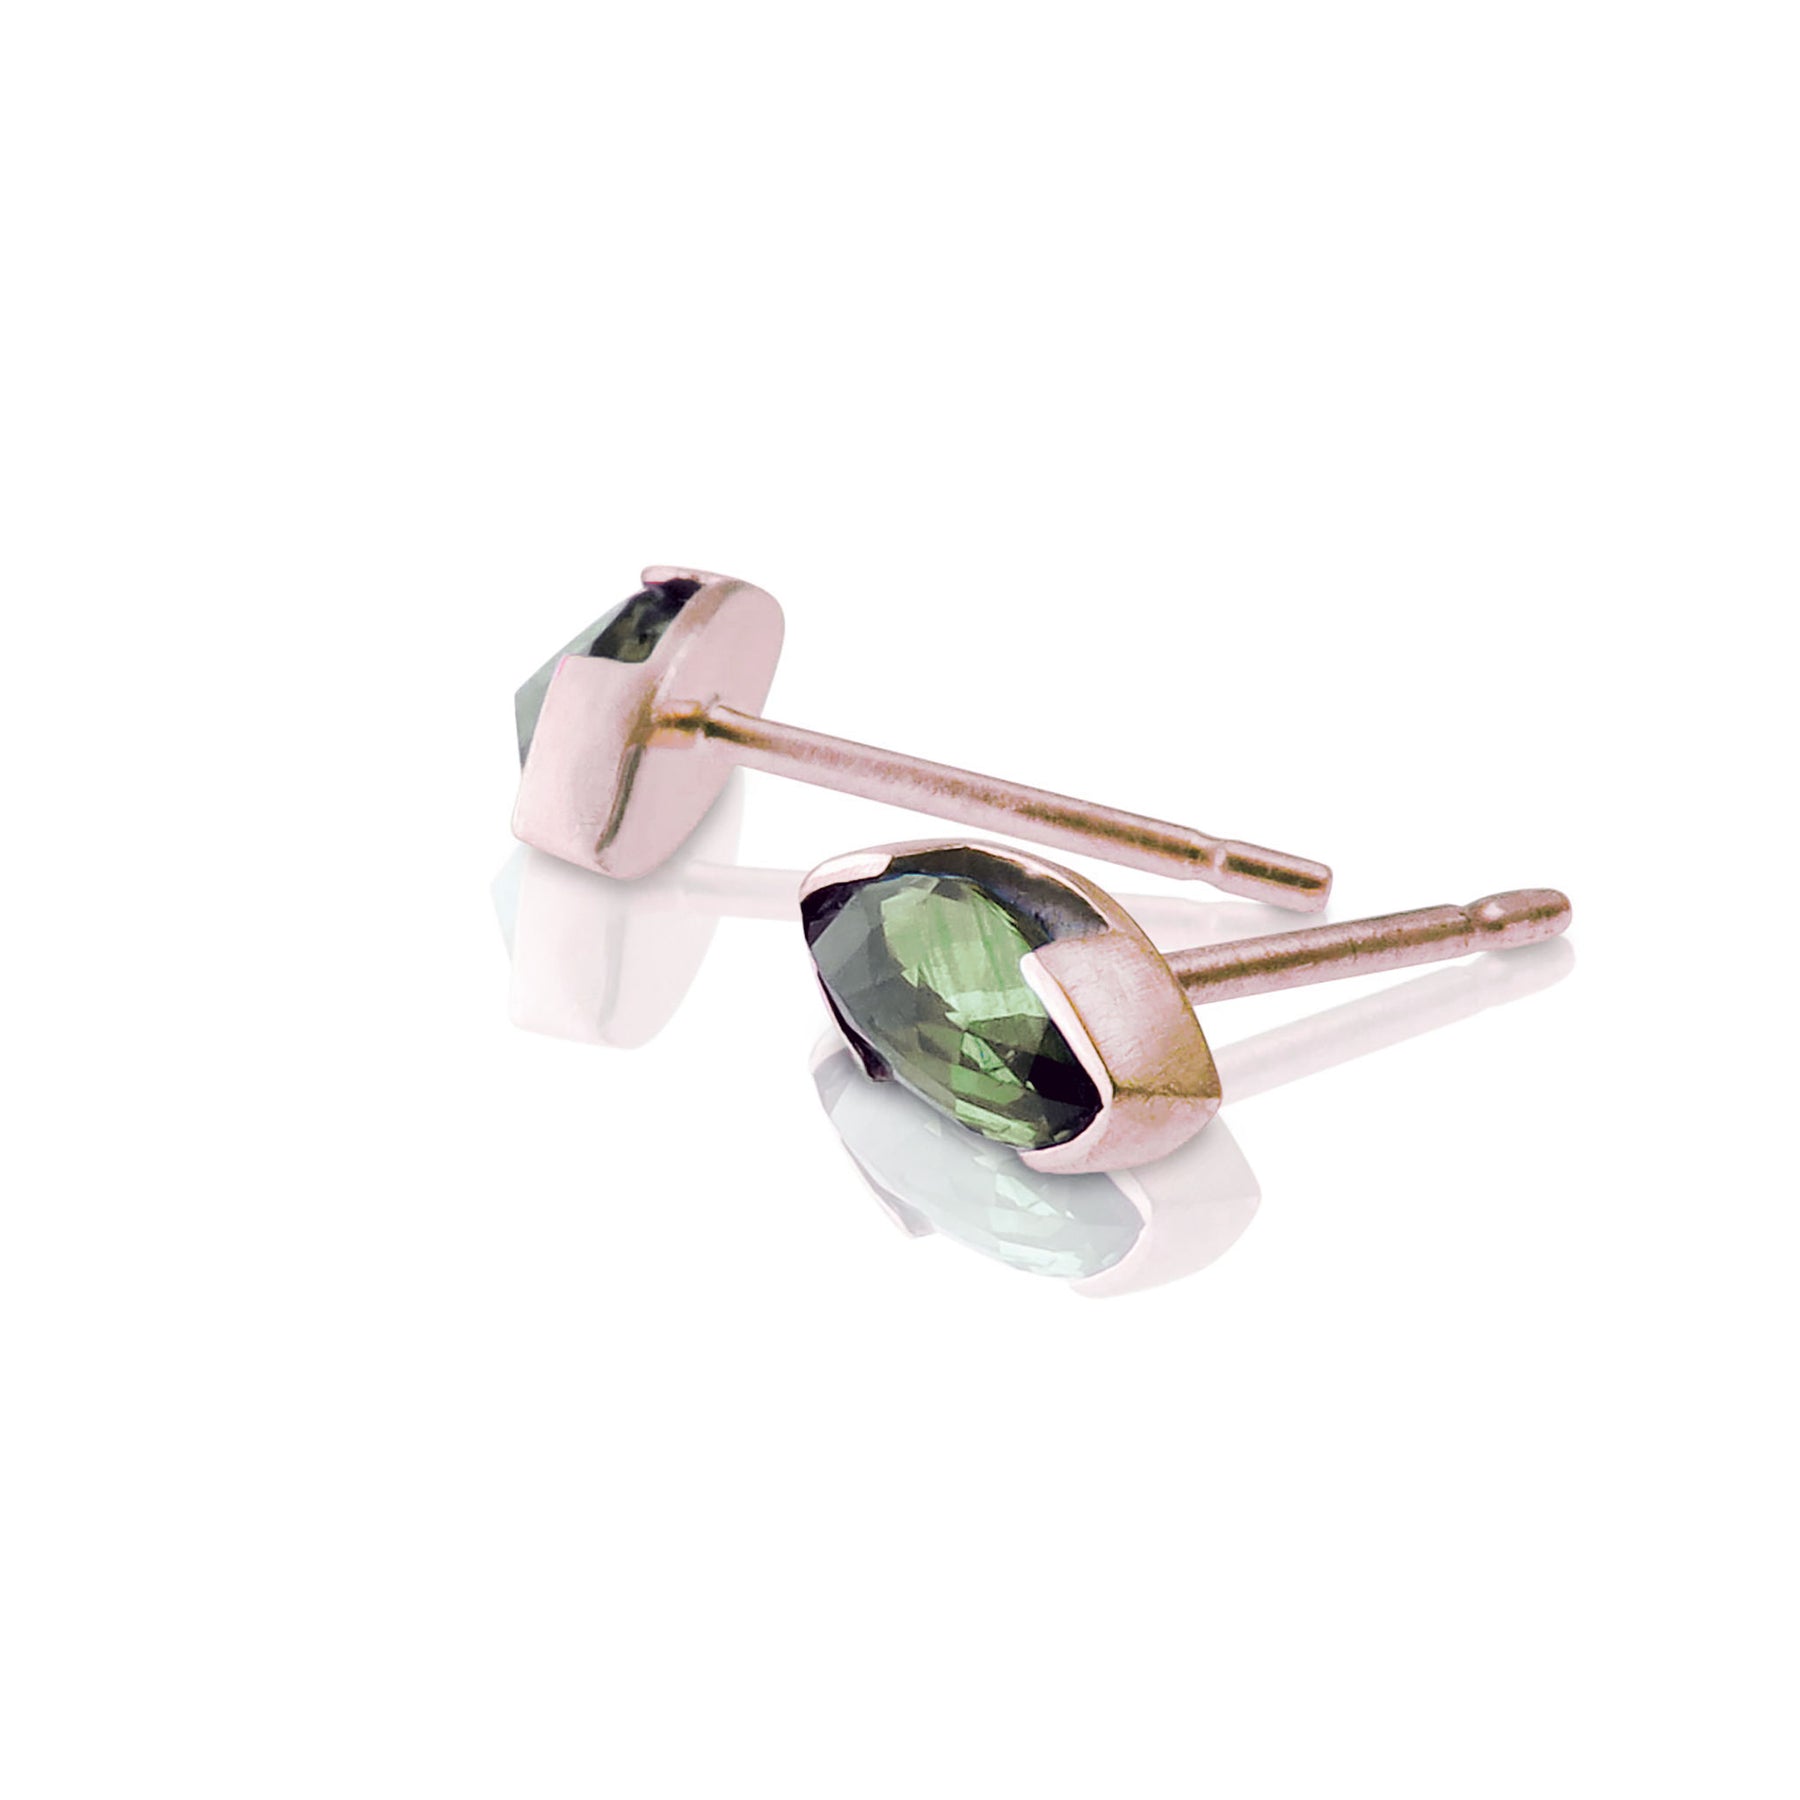 Gemstone 9ct Gold Earring Stud - Single - Boutee